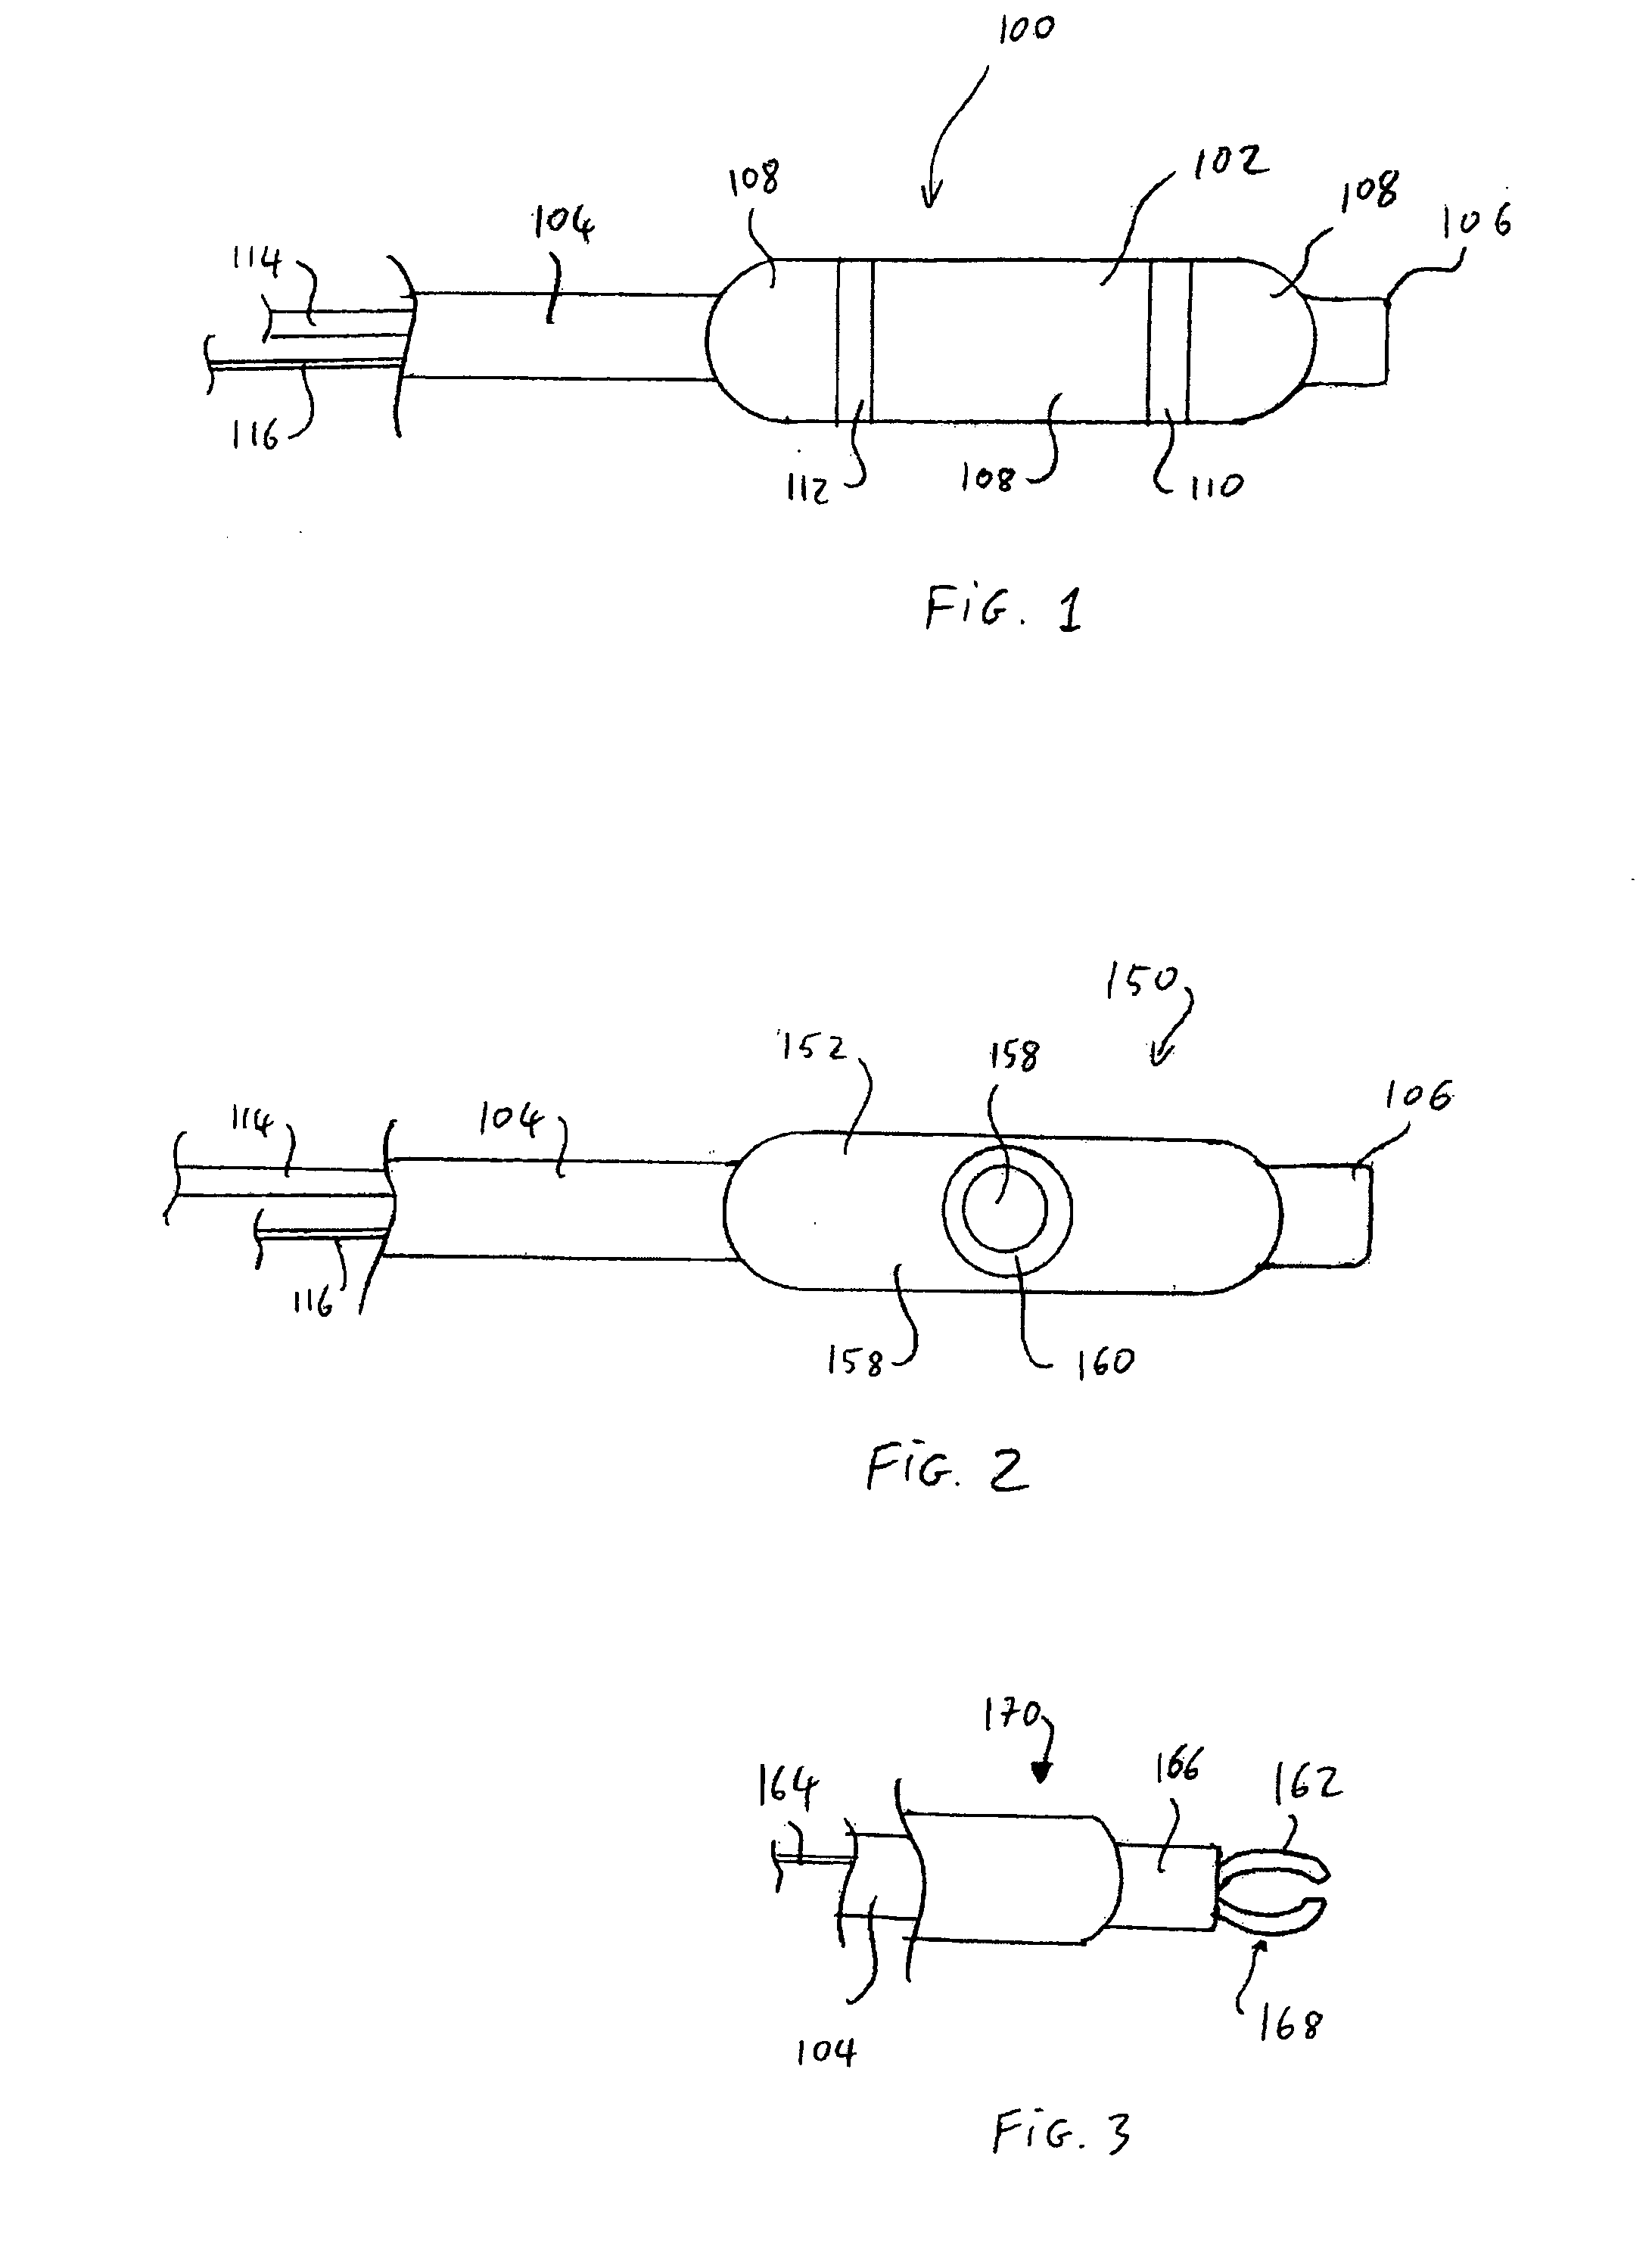 Apparatus and method for ablation of targeted tissue